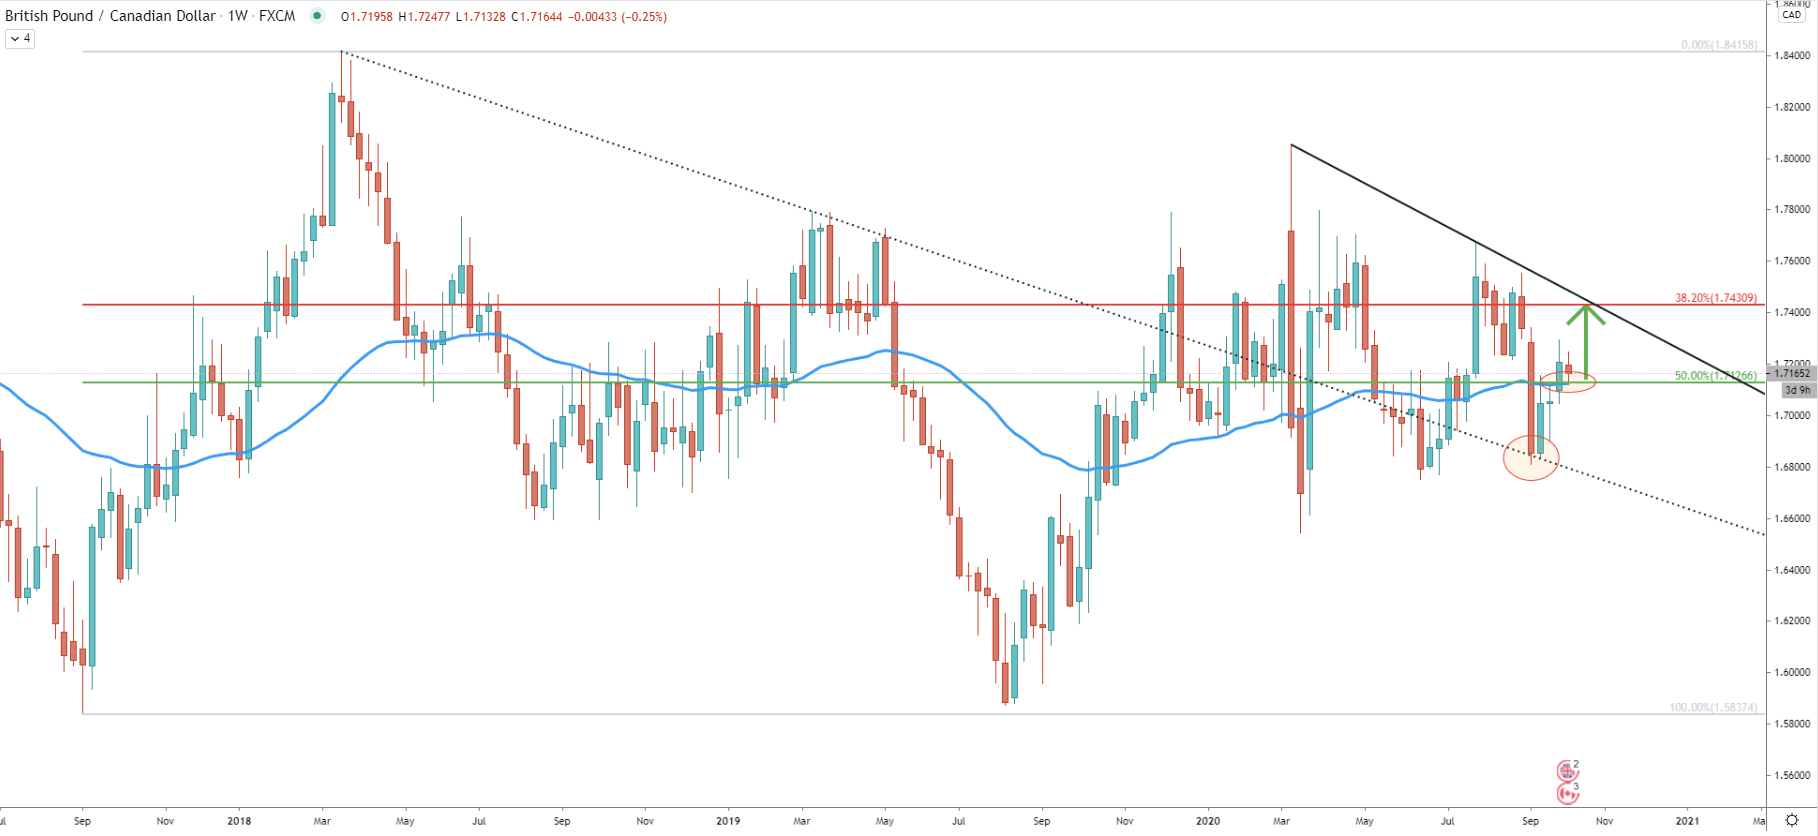 GBP/CAD Weekly Technical Analysis 6 Oct 2020